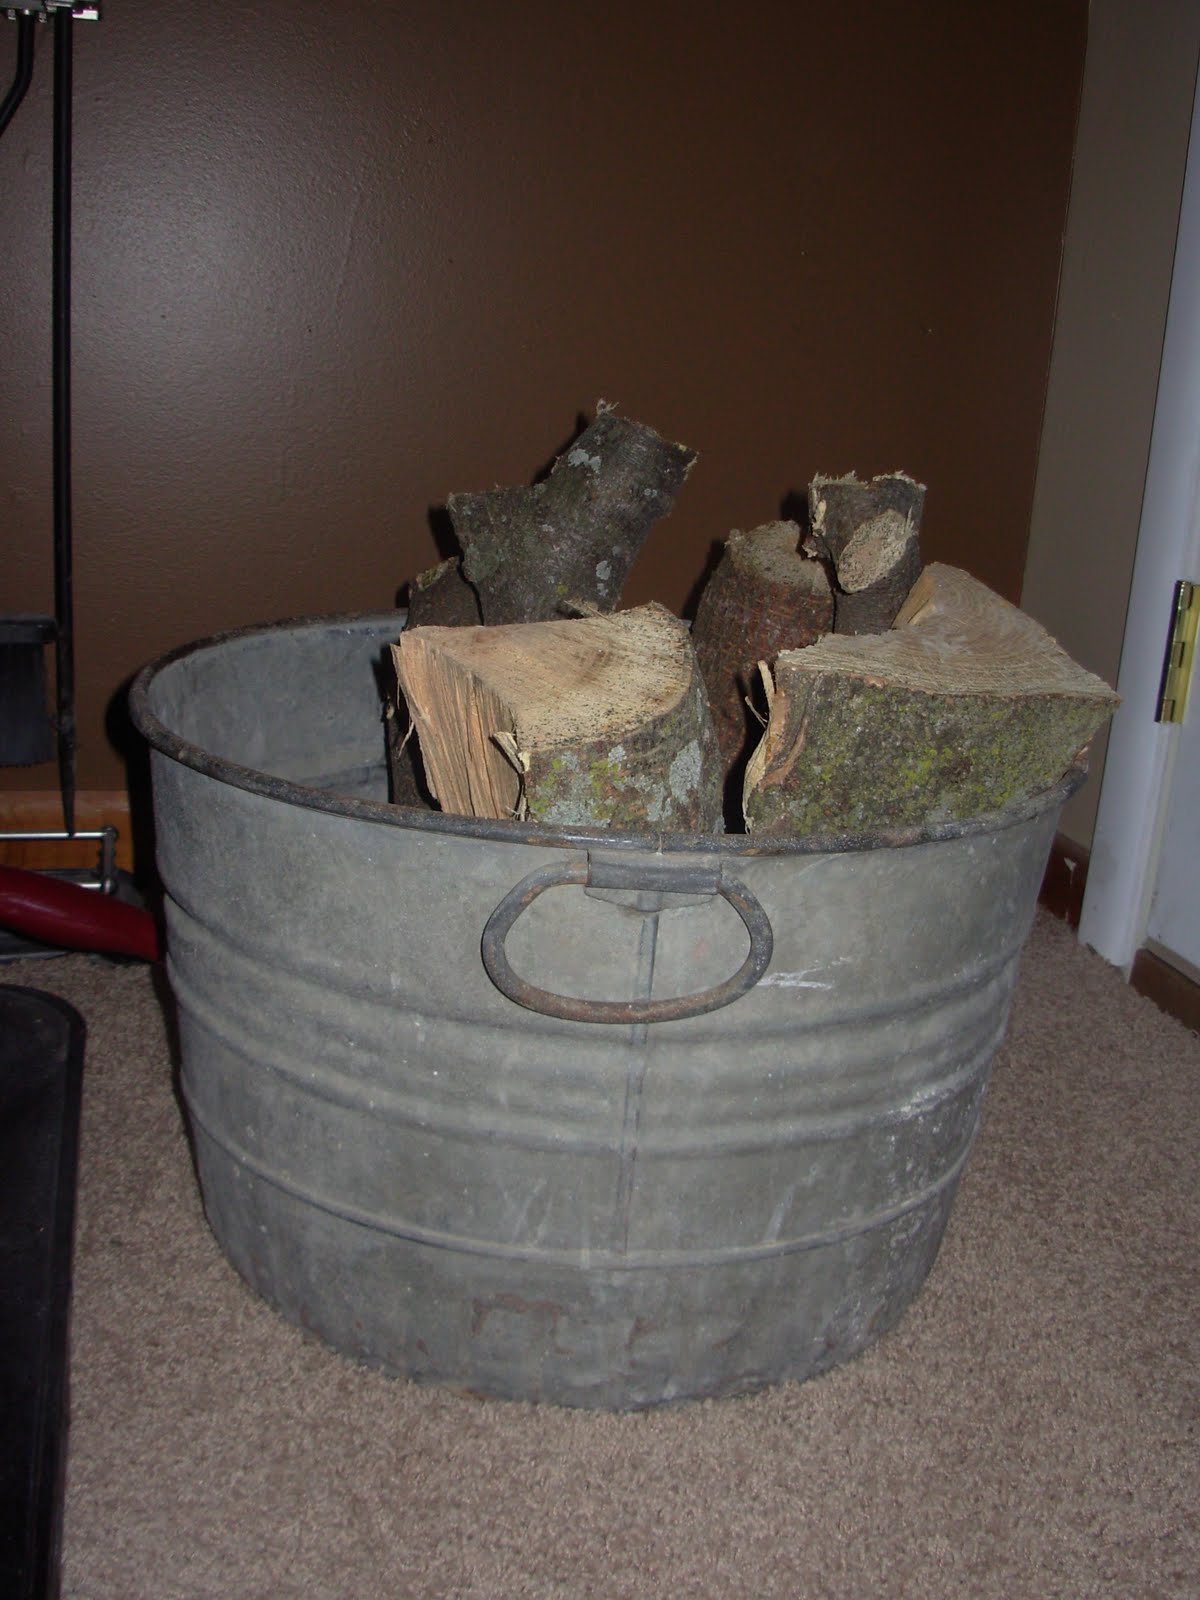 We store firewood in a tin bucket that I found in the barn. title=